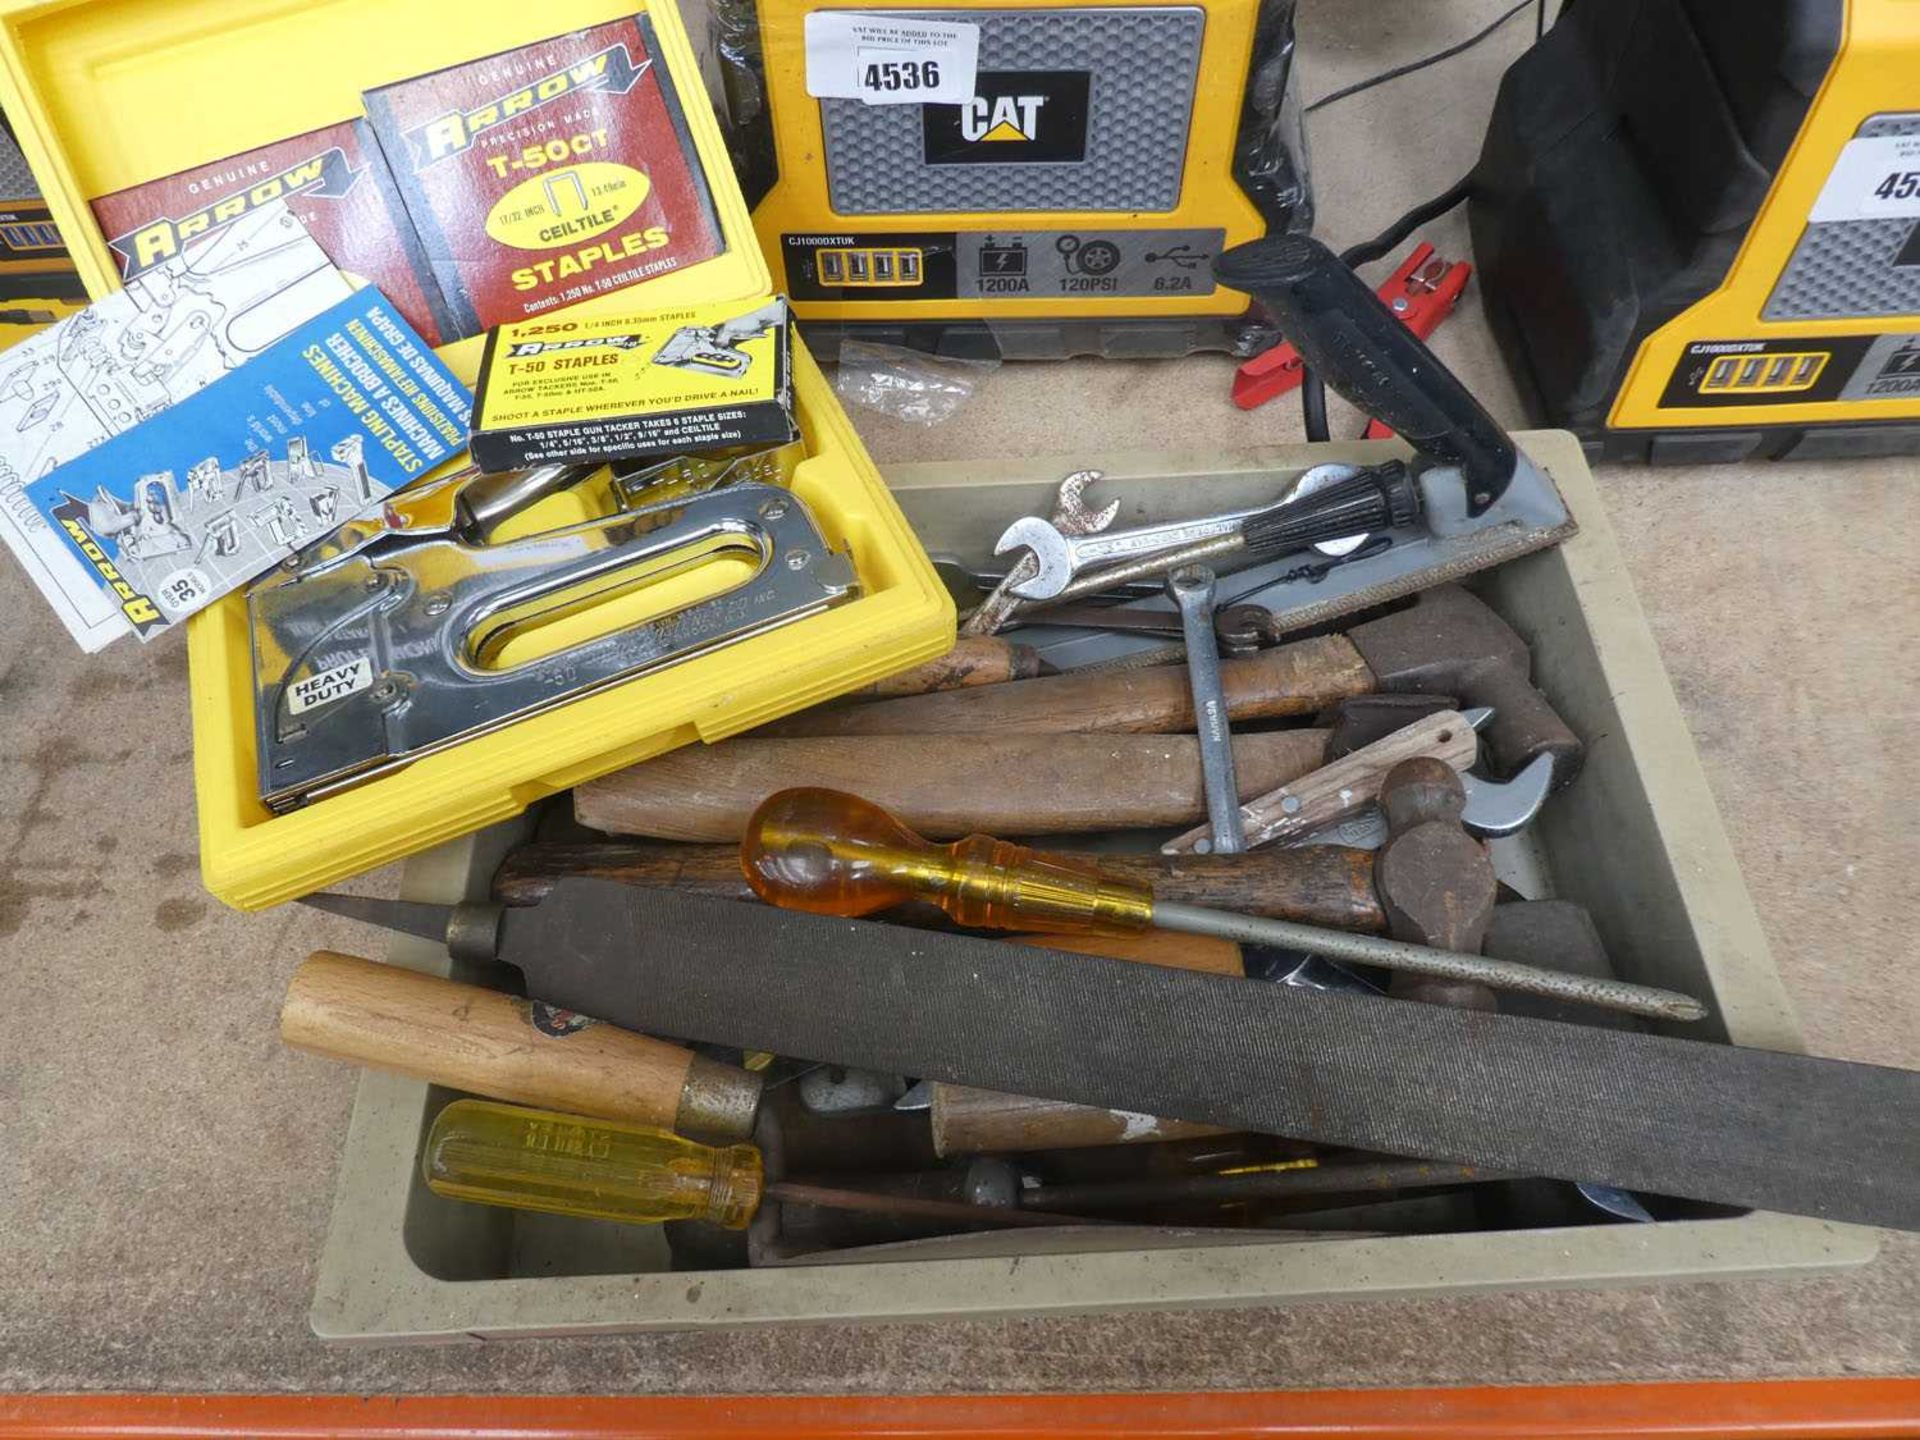 Small drawer containing hammers, spanners, screwdrivers, staple gun, files etc